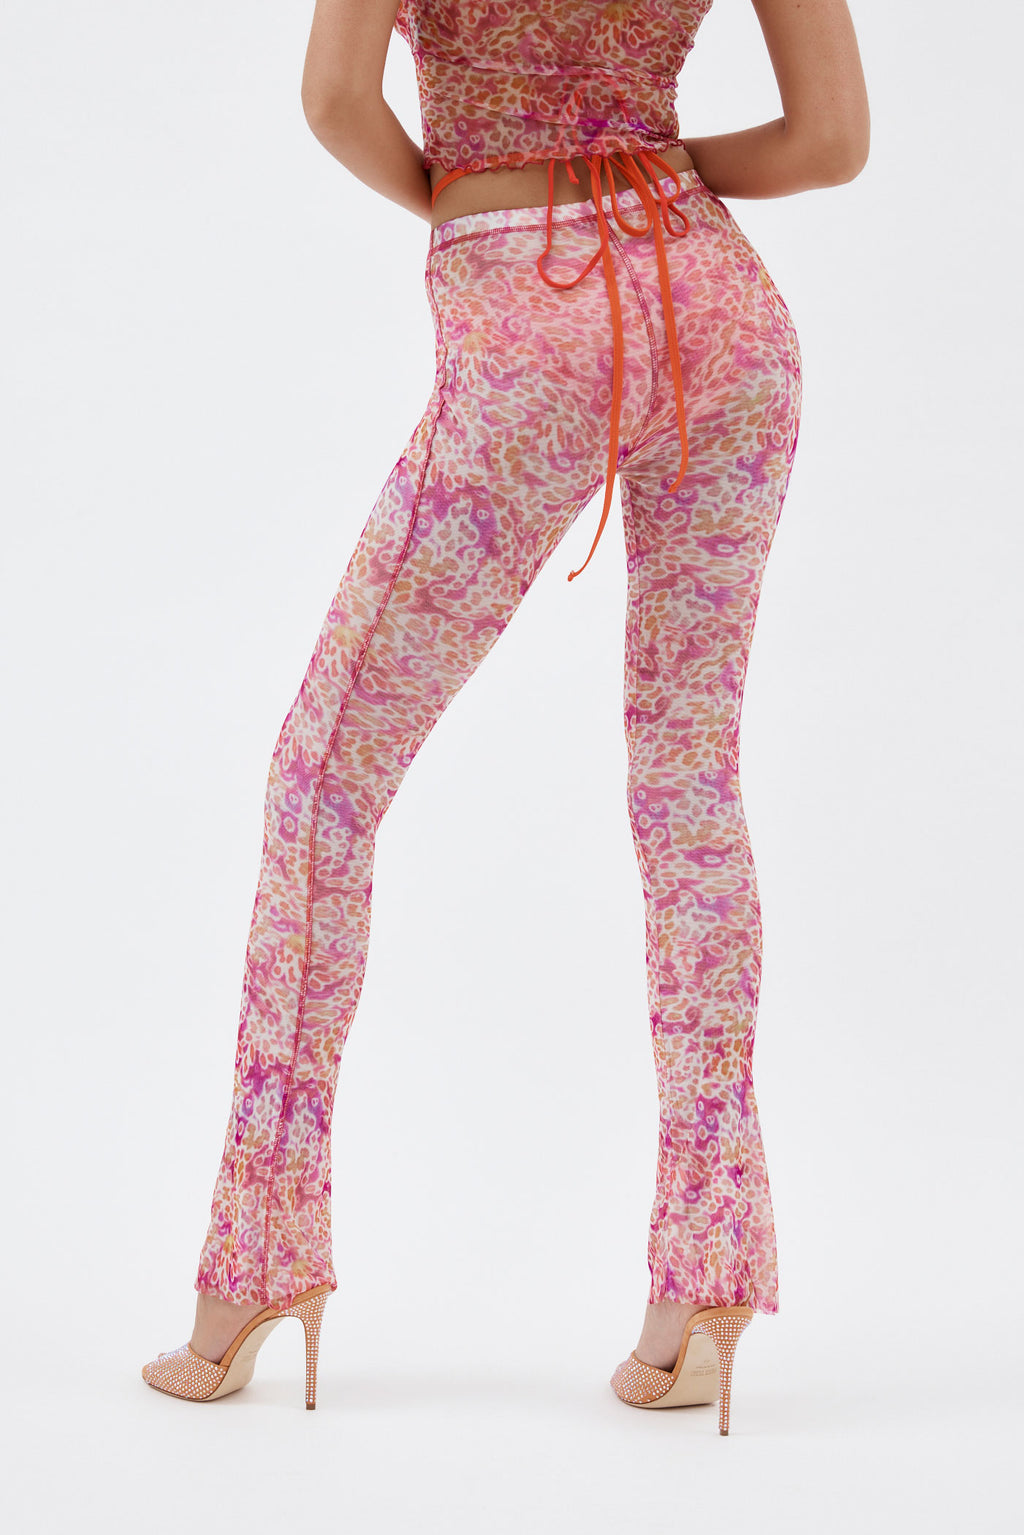 Mesh Leopard Orchids Fitted Pants